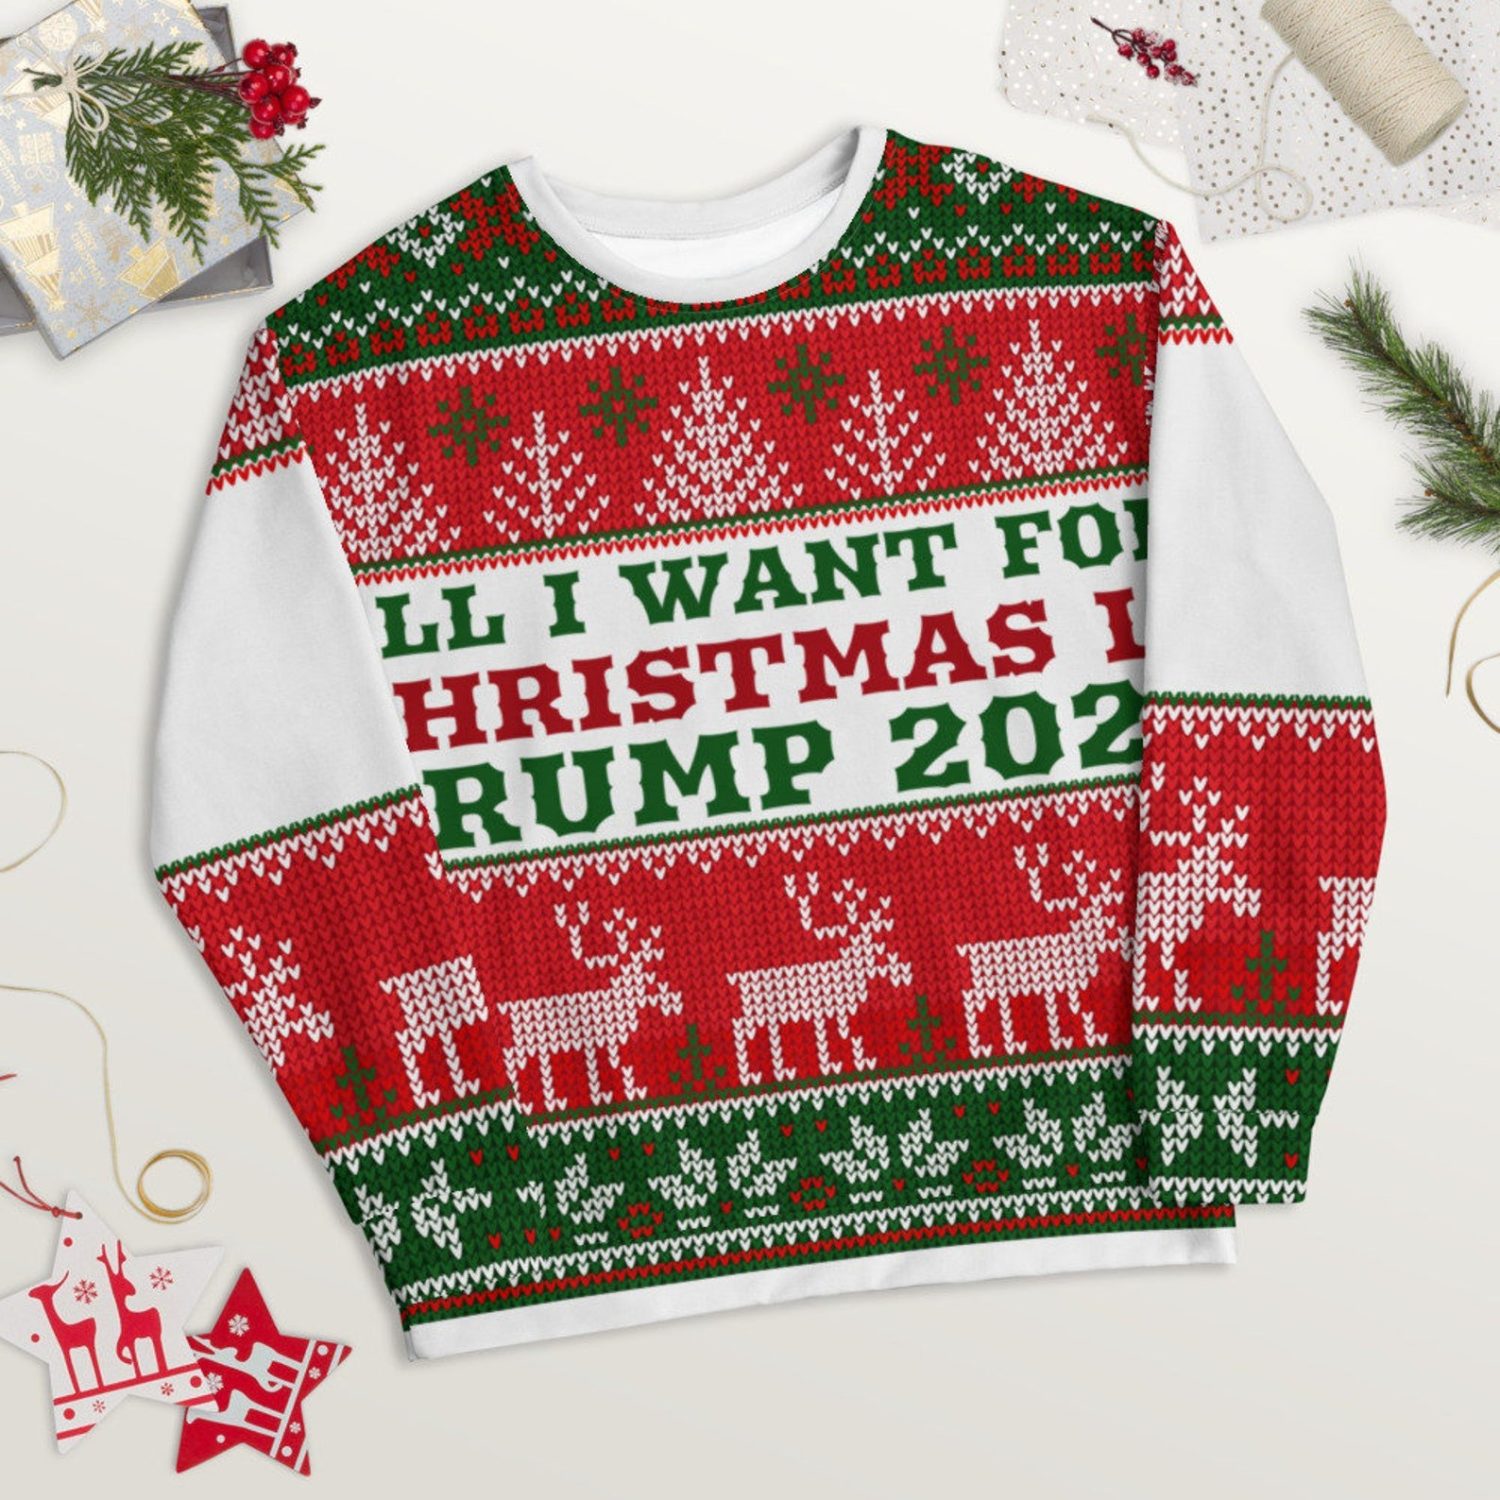 All I Want For Christmas Is Trump 2024 Christmas Sweater AOP Sweater Red S